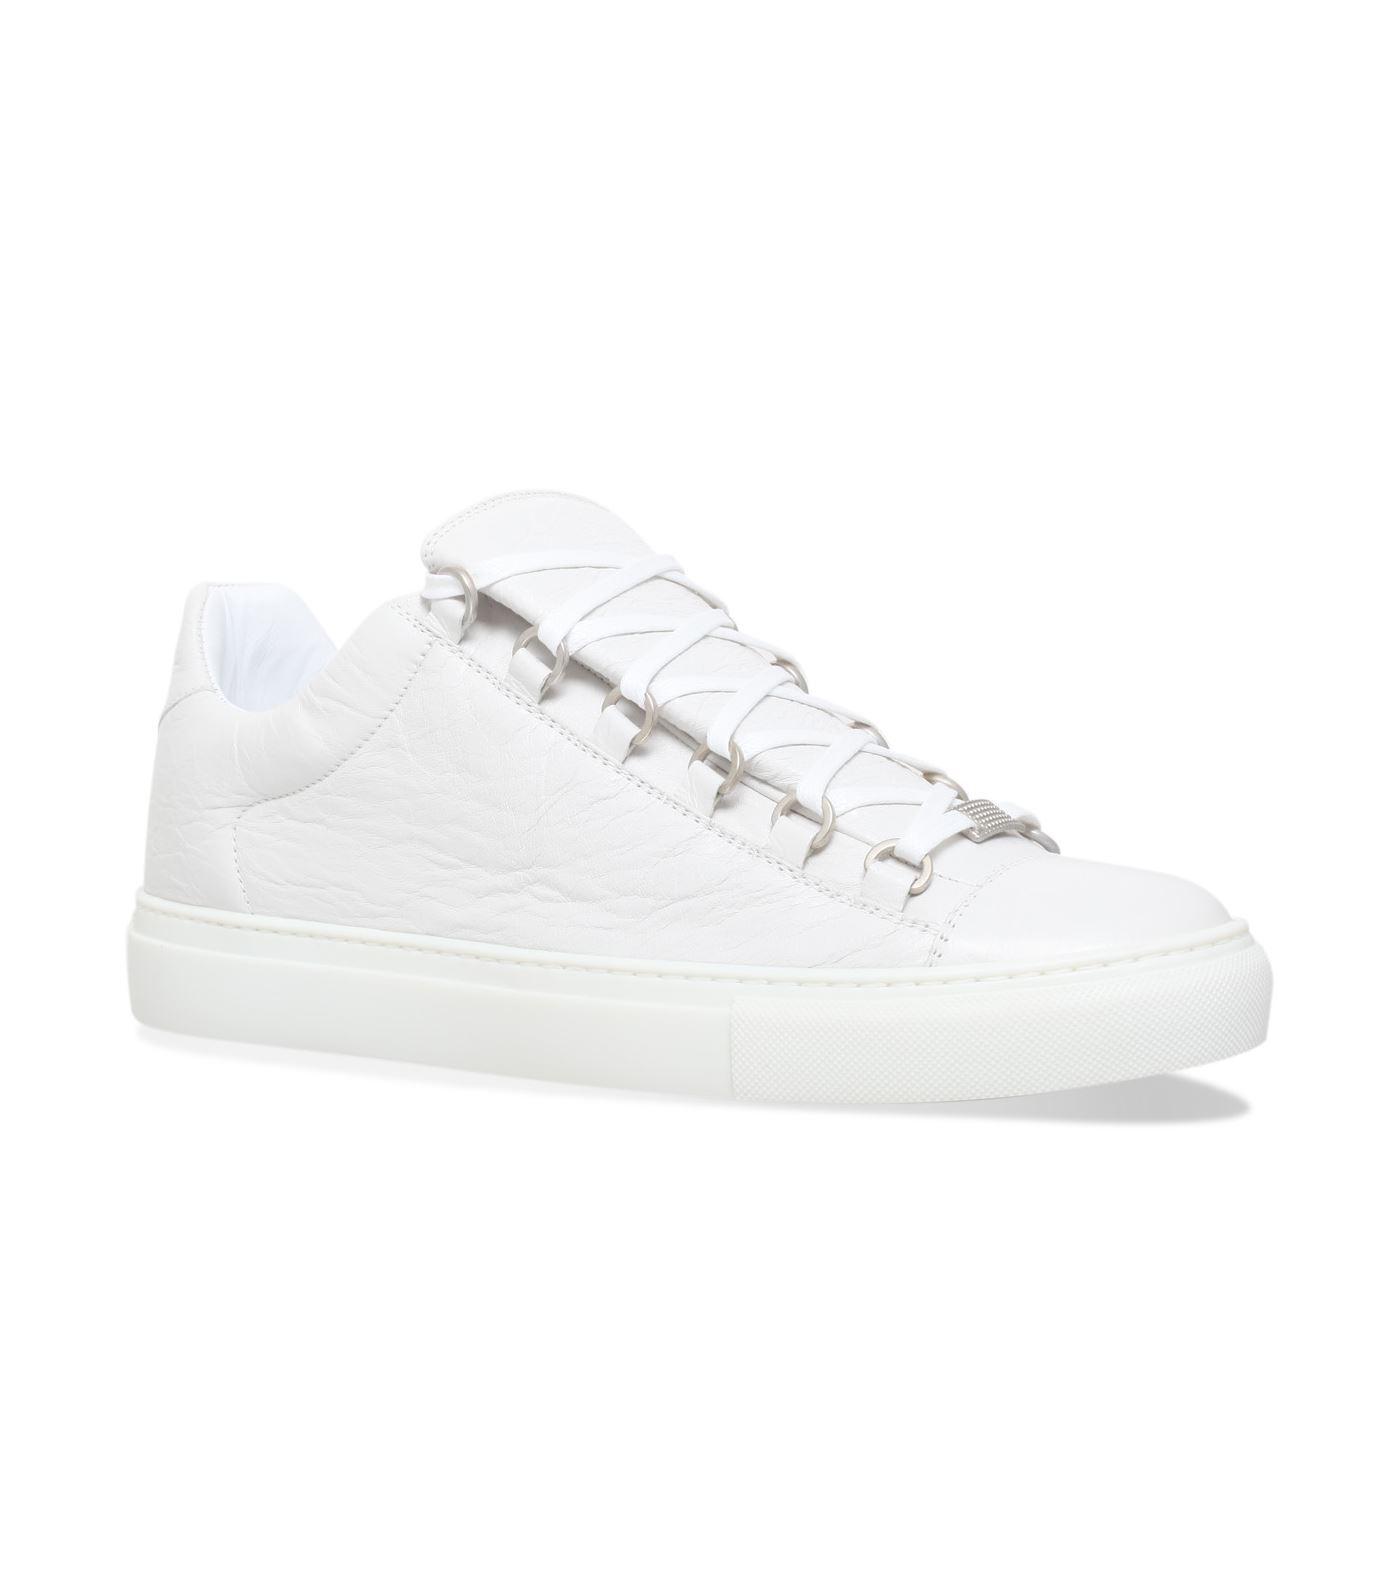 Lyst - Balenciaga Leather Arena Low-top Sneakers in White for Men ...